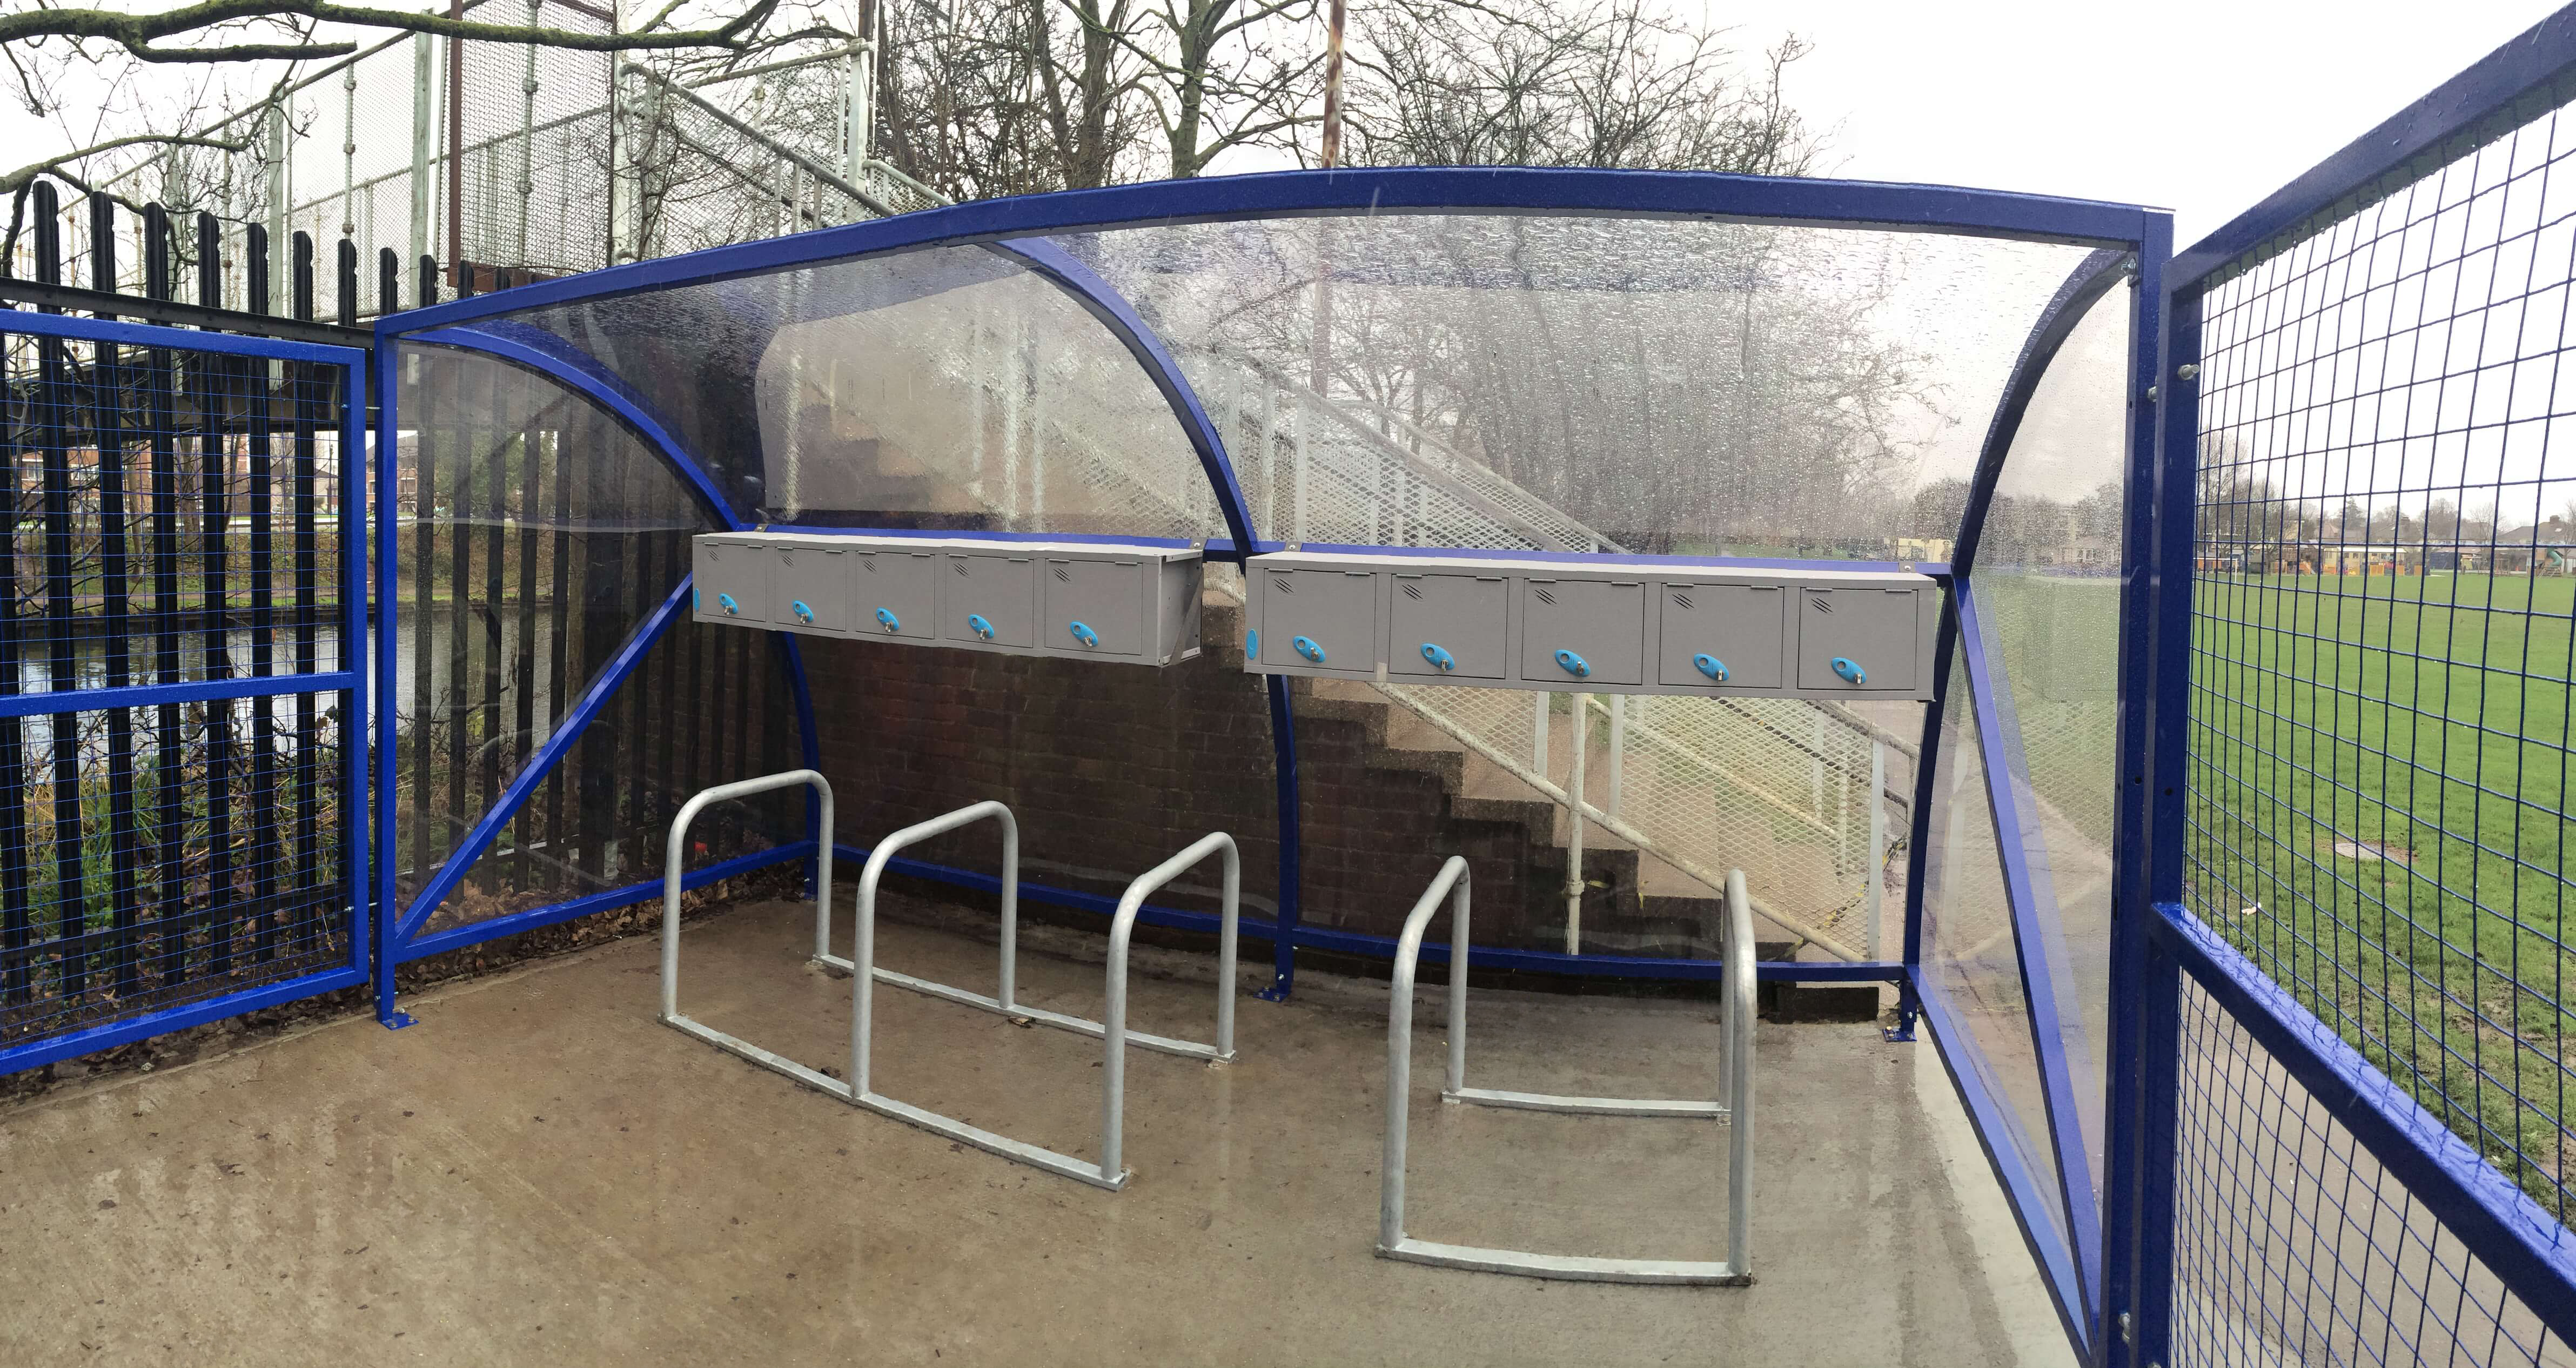 10 space original cycle shelter with toastrack cycle racks